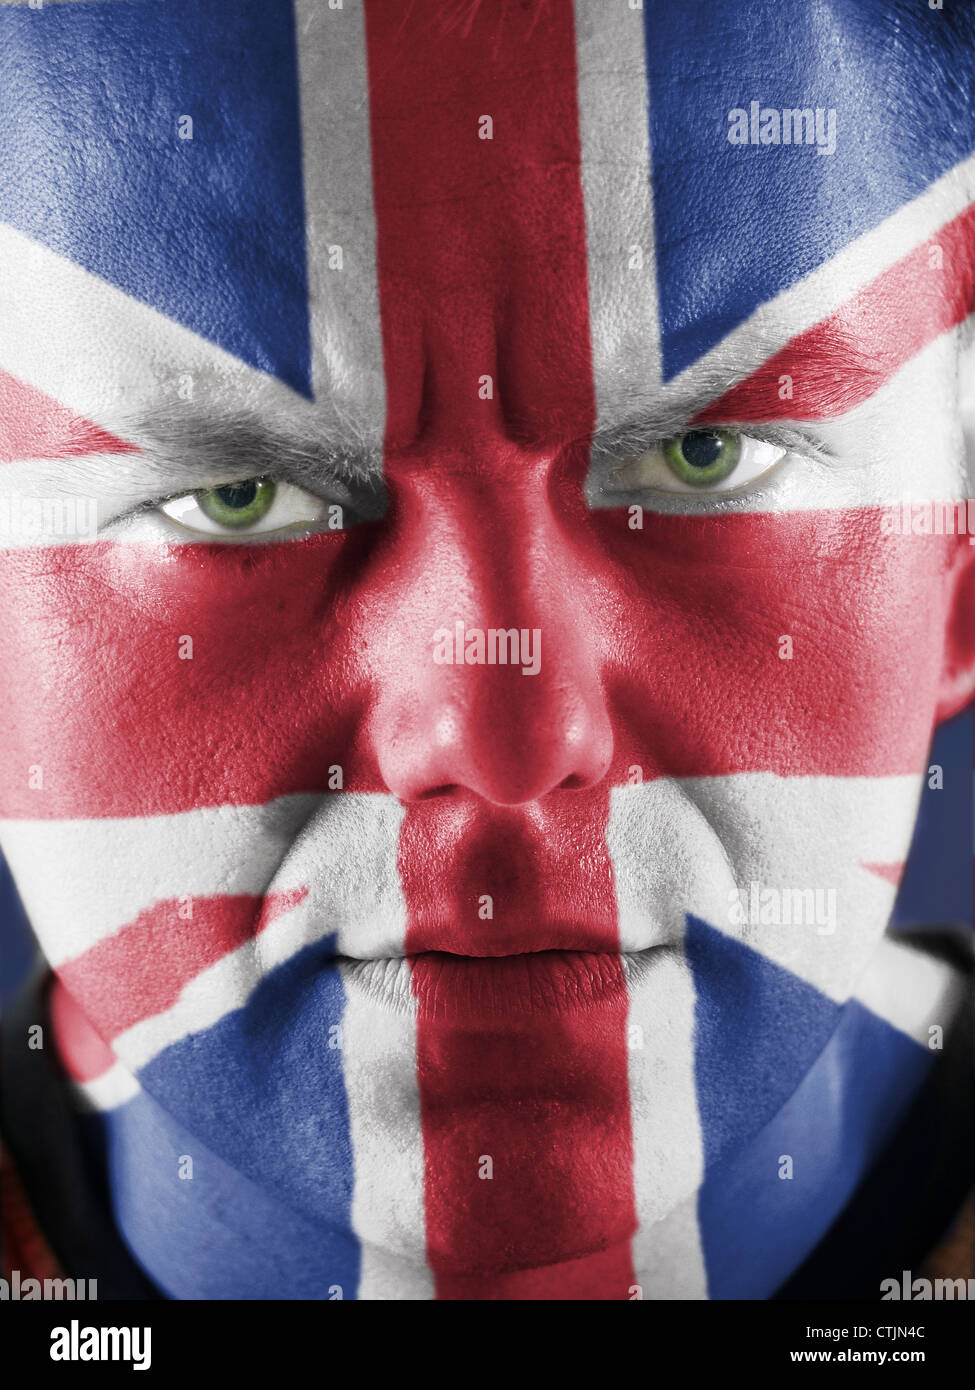 Closeup of young UK supporter face with painted national flag colors Stock Photo